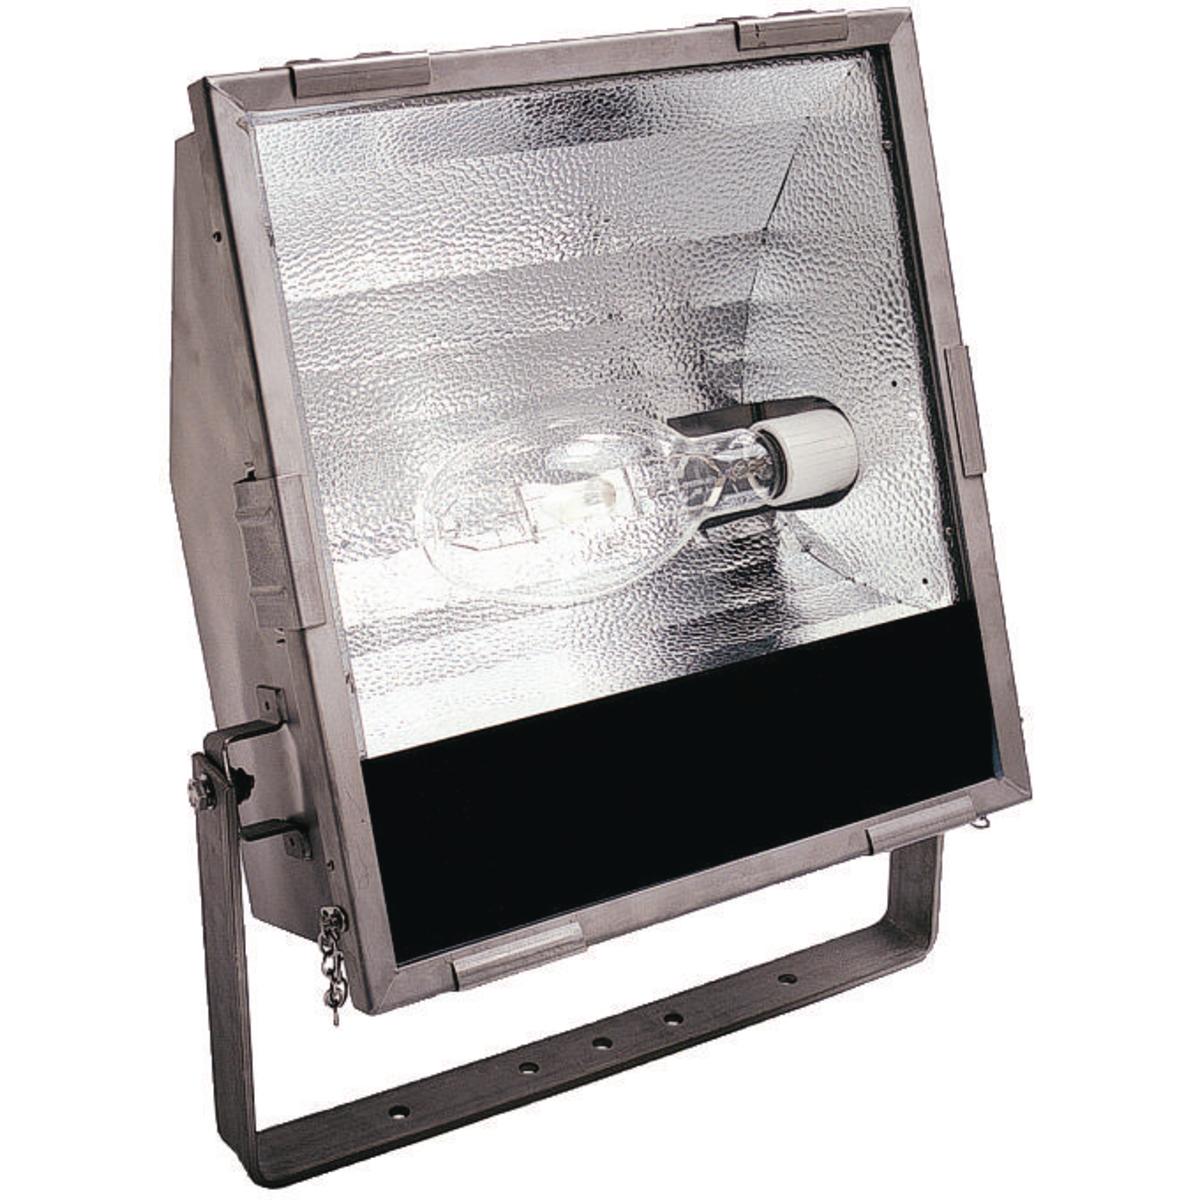 Hubbell KFS400SS KFSS Series - Stainless Steel 400 Watt High Pressure Sodium Marine Floodlight (Lamp Not Included) - Quadri-Volt (120/208/240/277V) At 60Hz  ; Type 316 Stainless Steel Housing. 16-gauge housing ensures low corrosion and long life, reducing maintenance cost